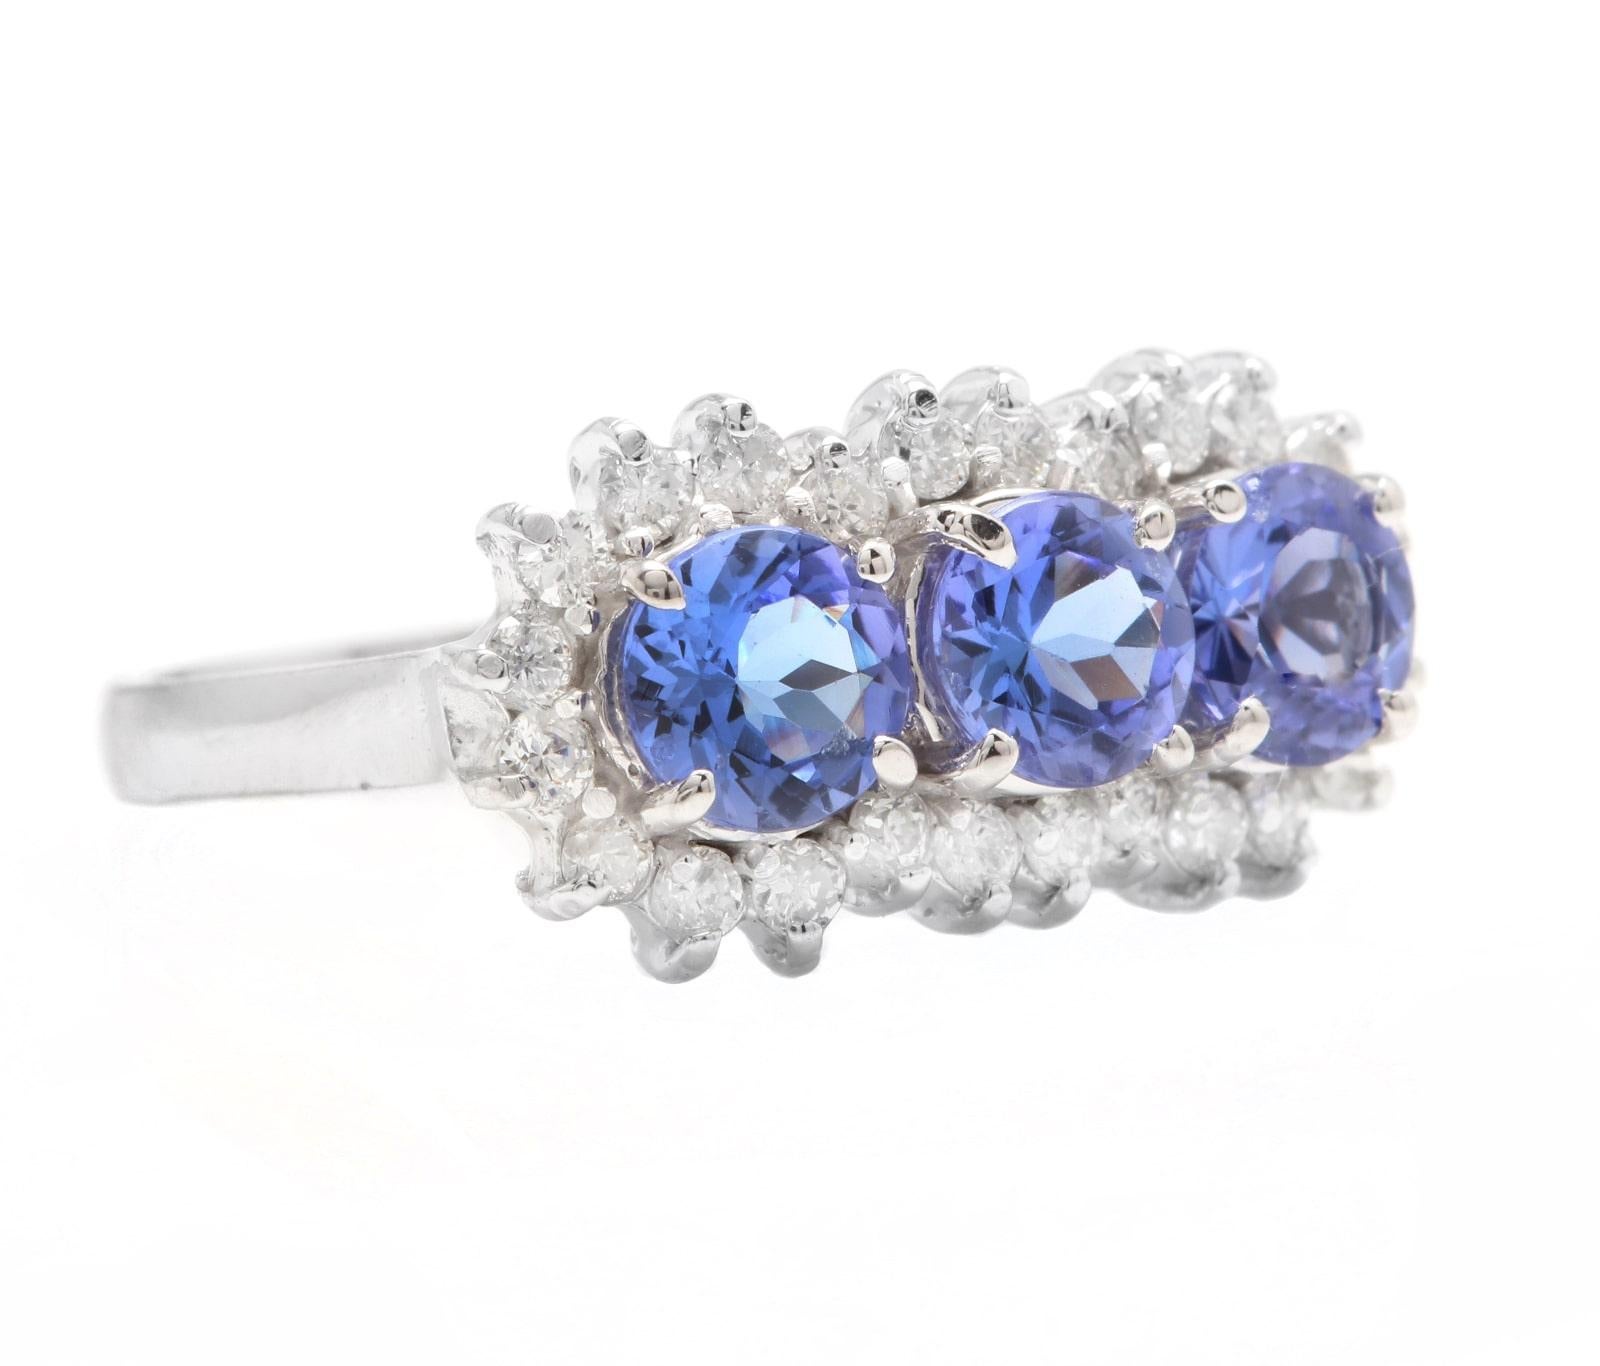 2.20 Carats Natural Very Nice Looking Tanzanite and Diamond 14K Solid White Gold Ring

Suggested Replacement Value:  $3,500.00

Total Natural Round Tanzanite Weight is: Approx. 1.70 Carats 

Tanzanite Measures Approx. 5.00mm

 Natural Round Diamonds